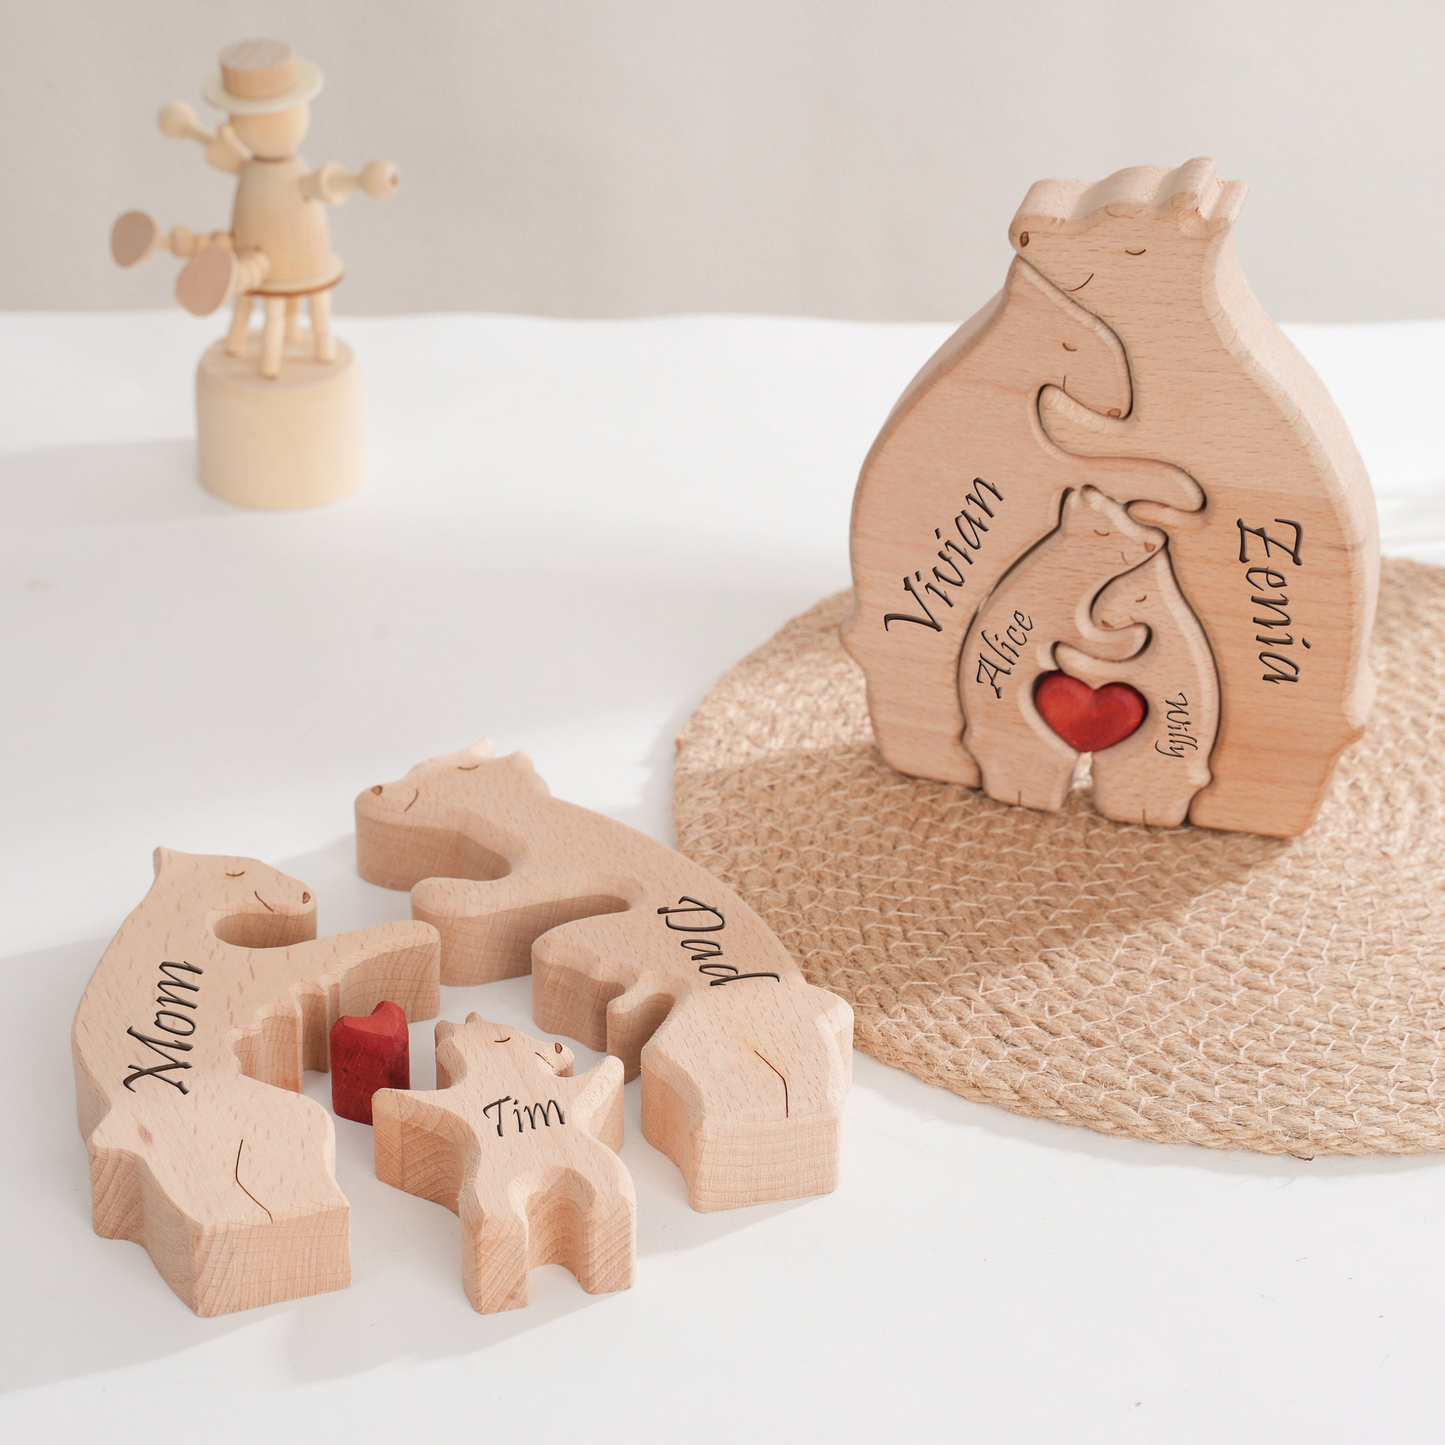 Bear Family Wooden Puzzle - Custom Family Name Gift for Parents and Children